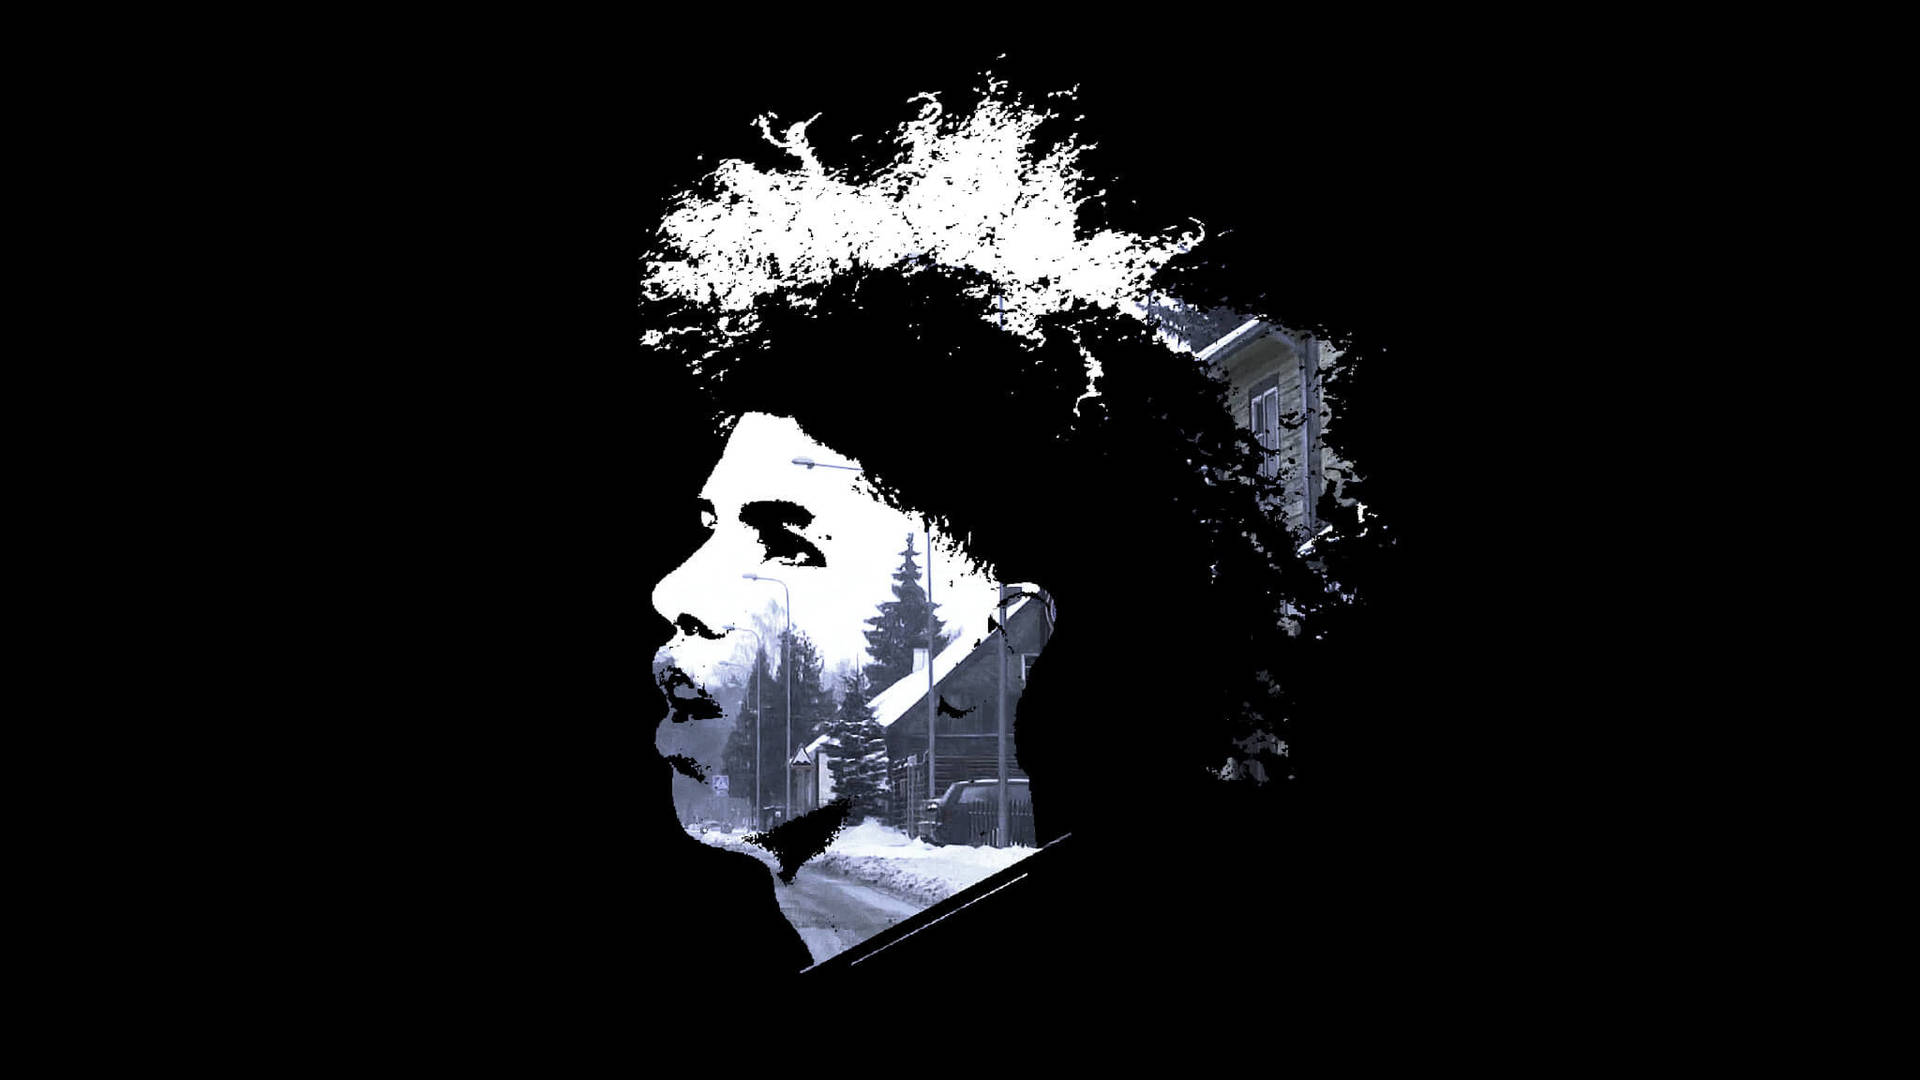 Lamelo Ball In Black And White